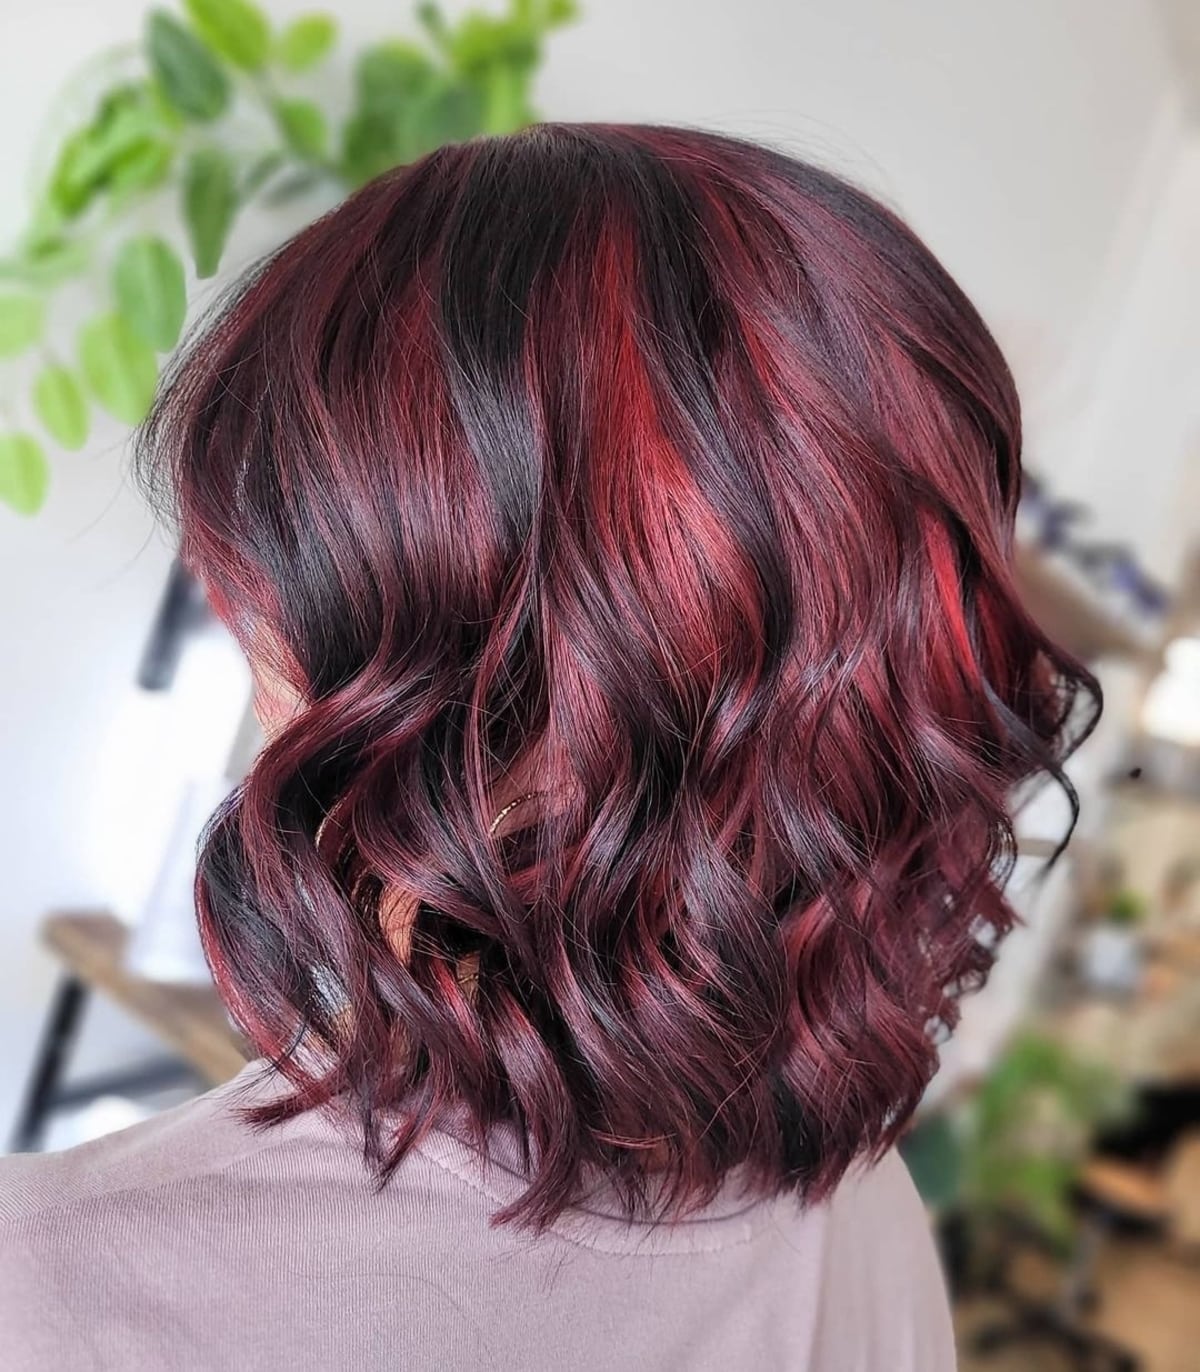 Black hair with chunky red highlights